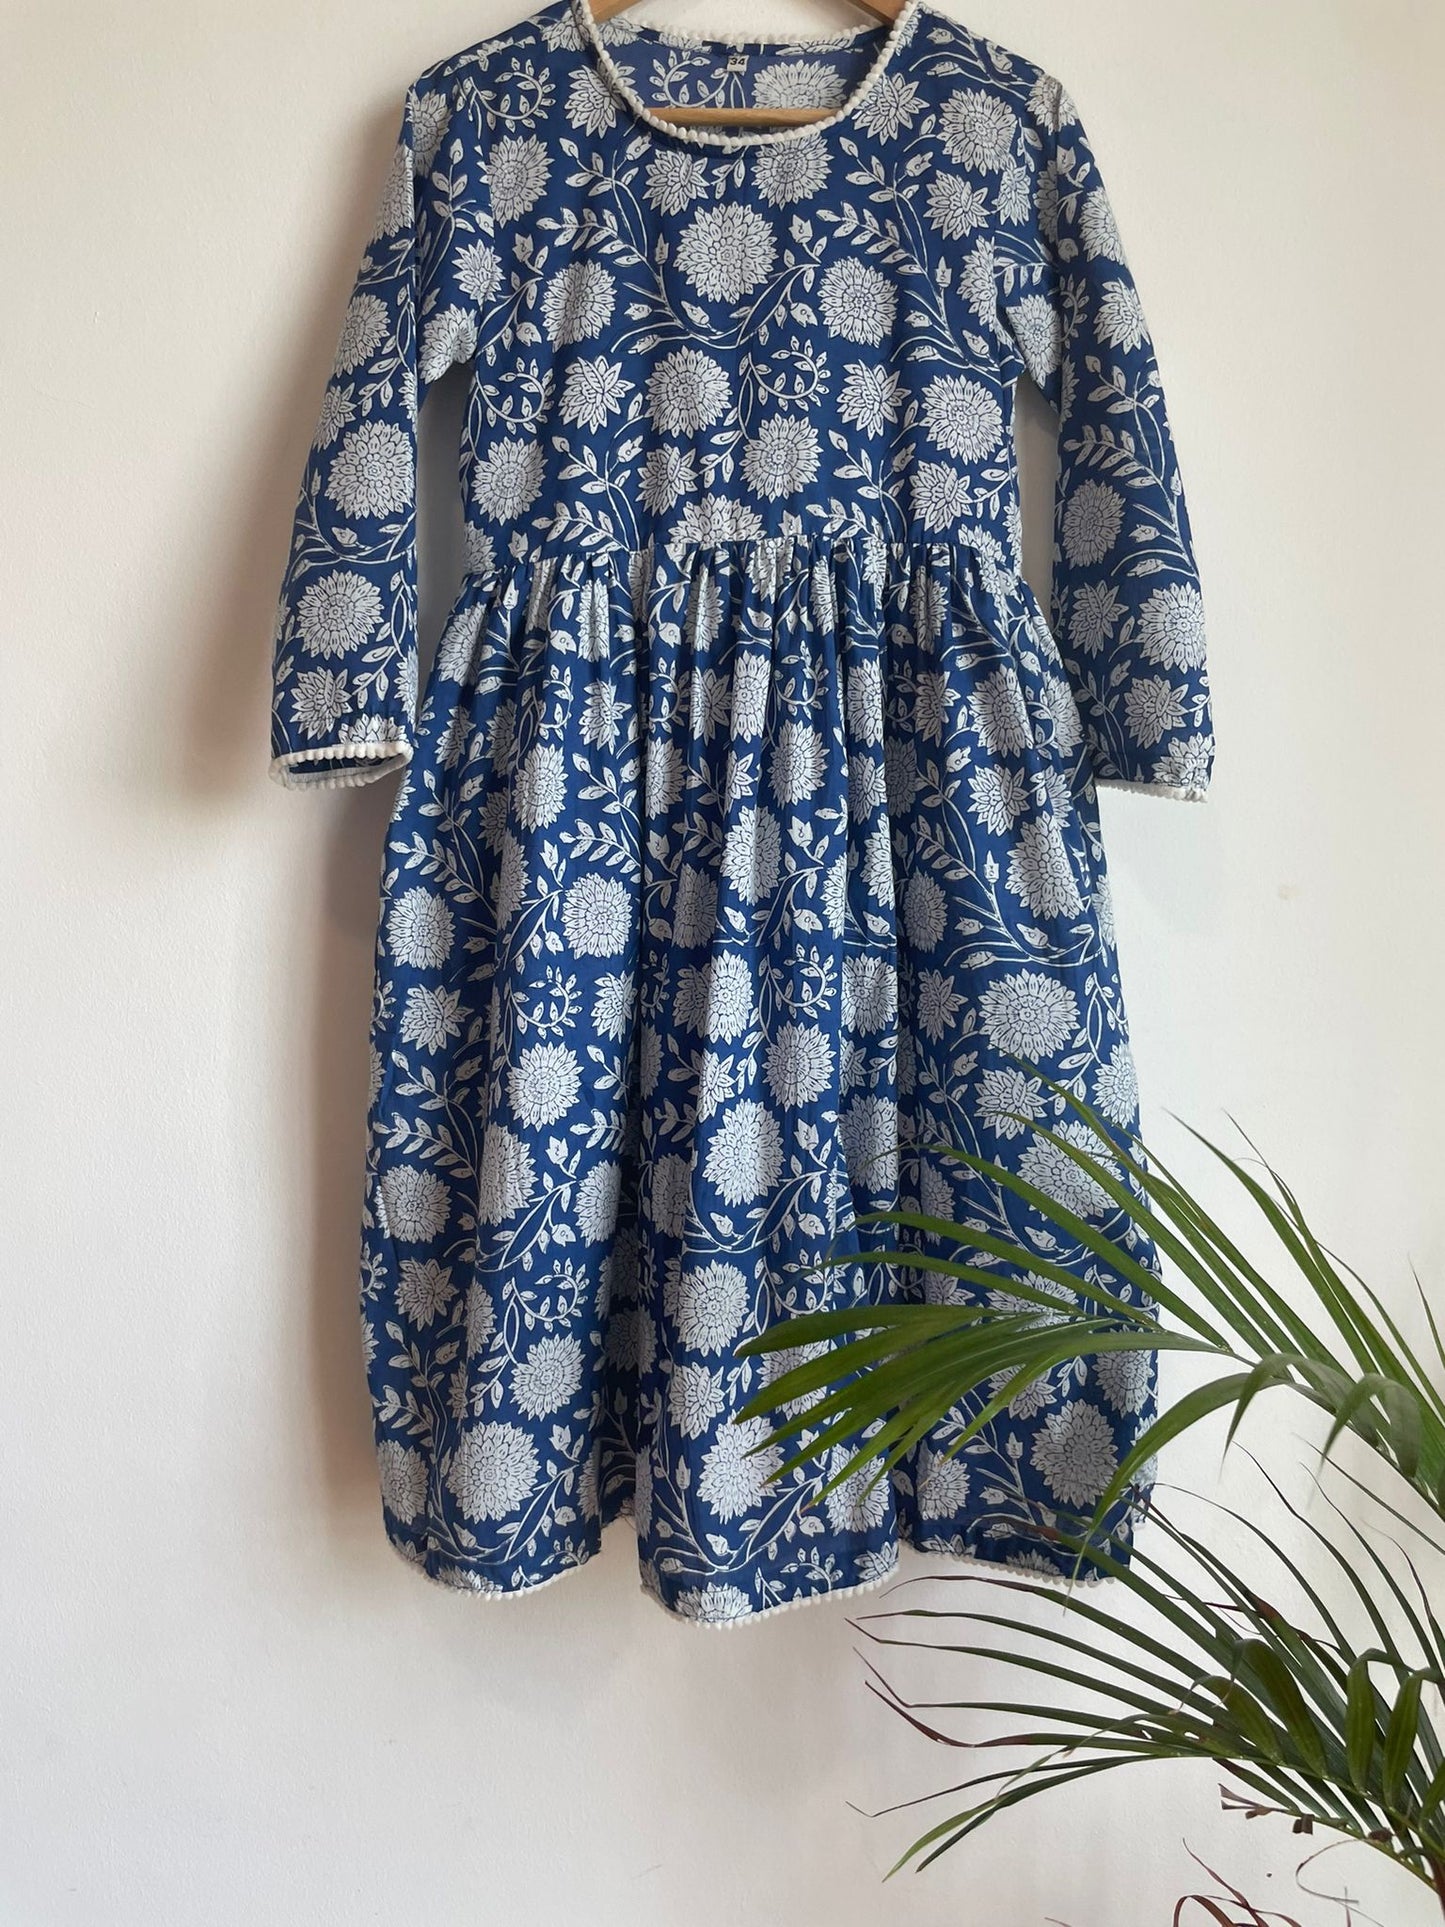 handblocked short dress for women in blue. affordable and high quality 